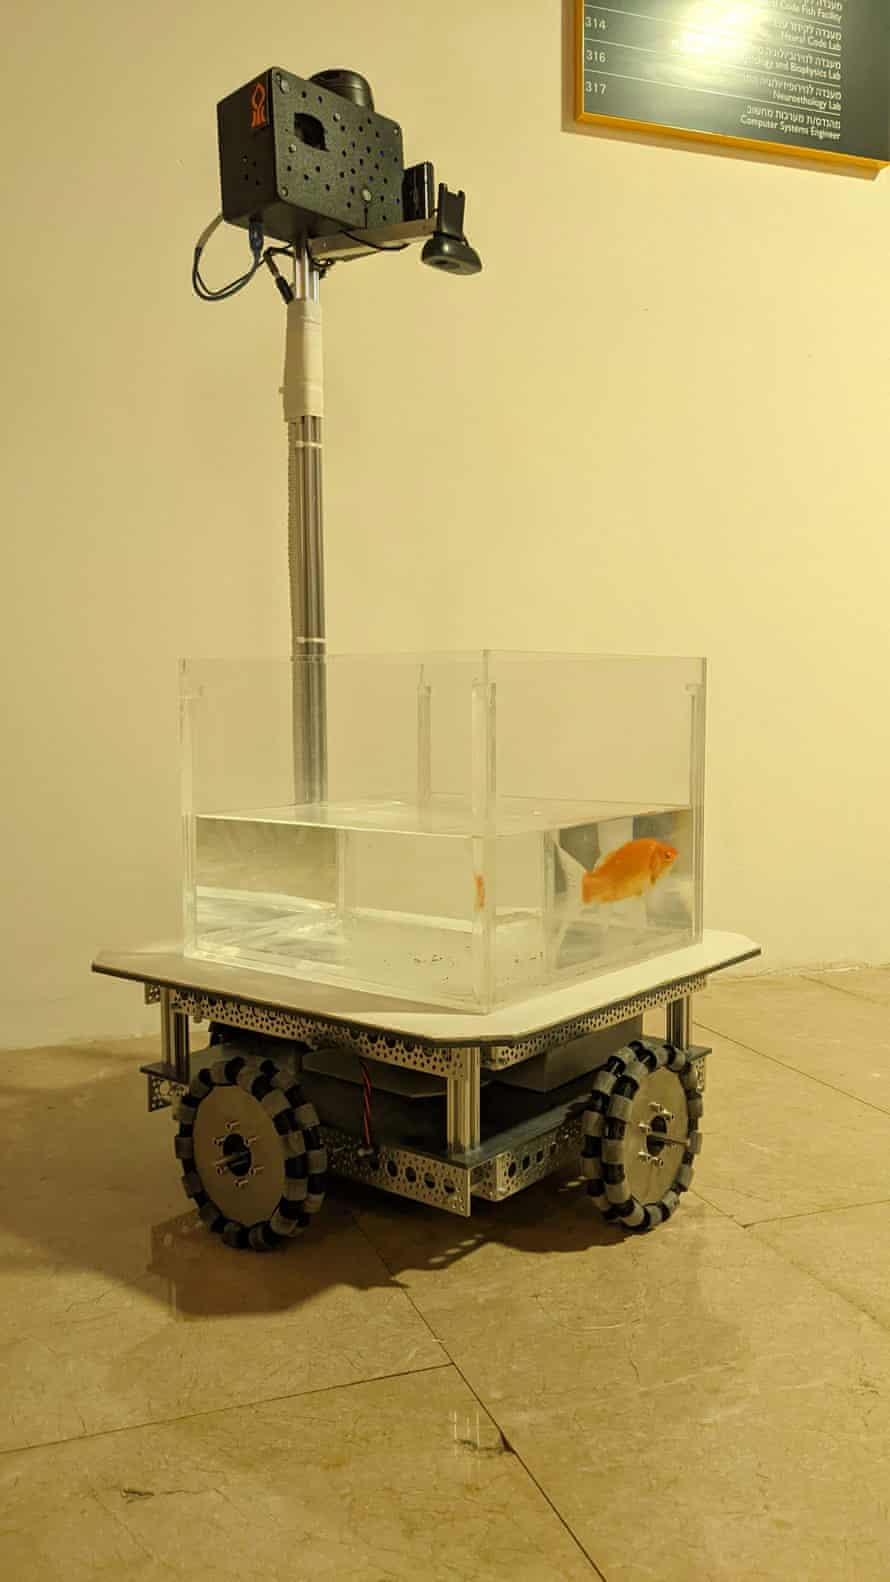 The watery tank on wheels created by Israeli scientists